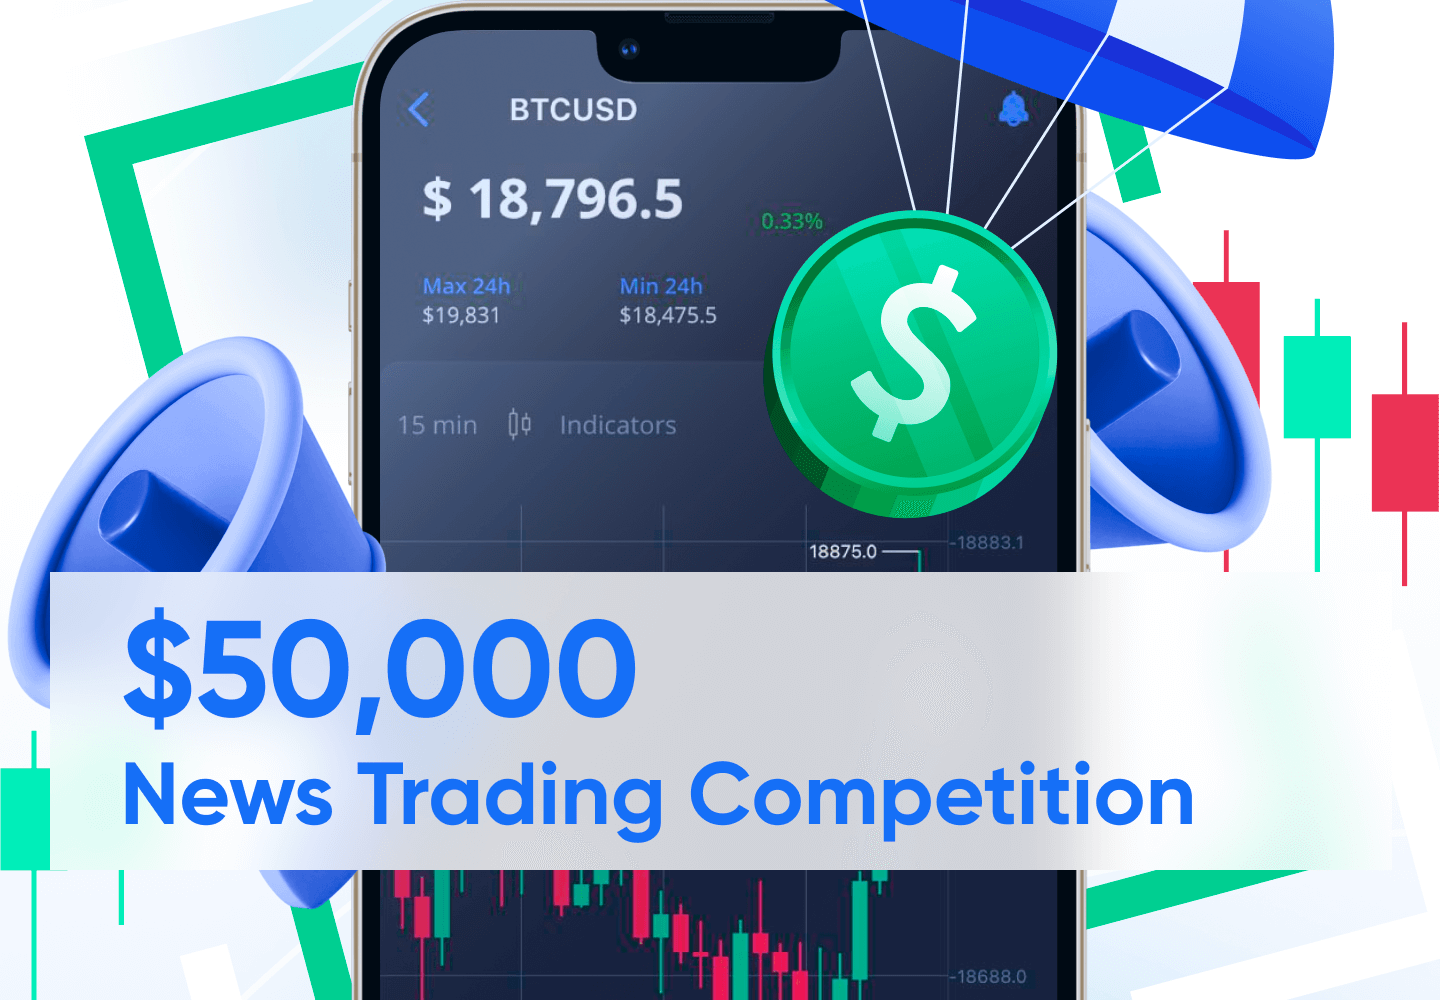 [ENDED] $50,000 News Trading Competition – How to Trade the News?